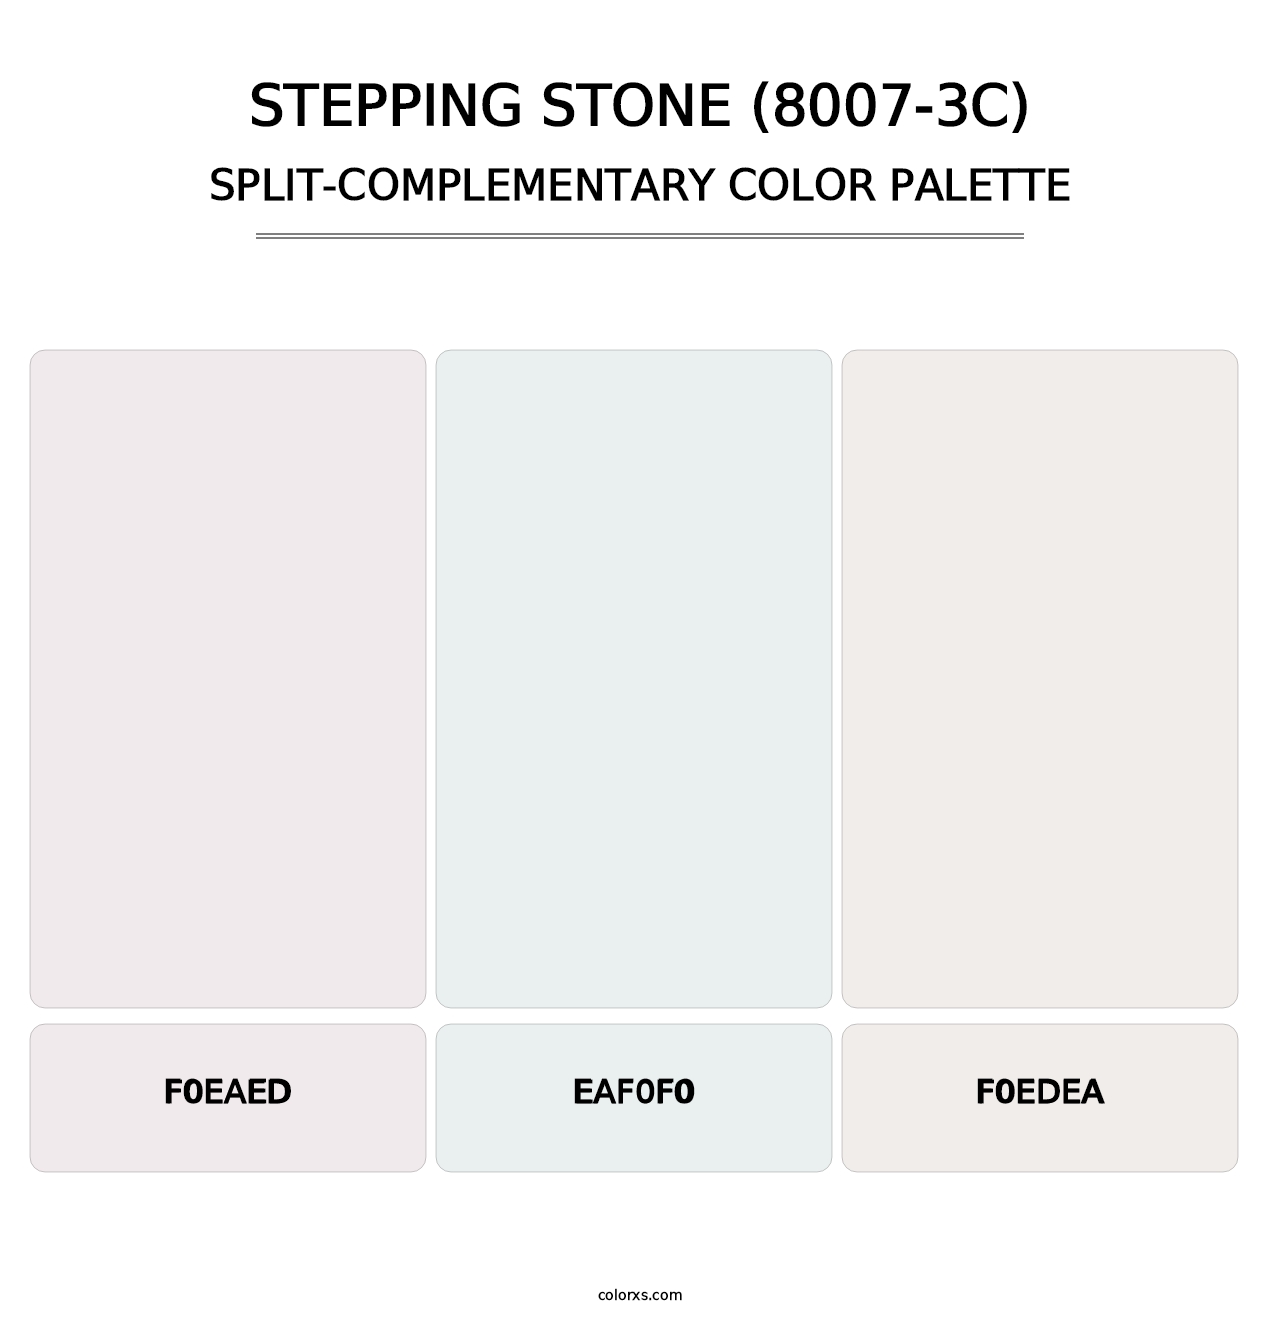 Stepping Stone (8007-3C) - Split-Complementary Color Palette